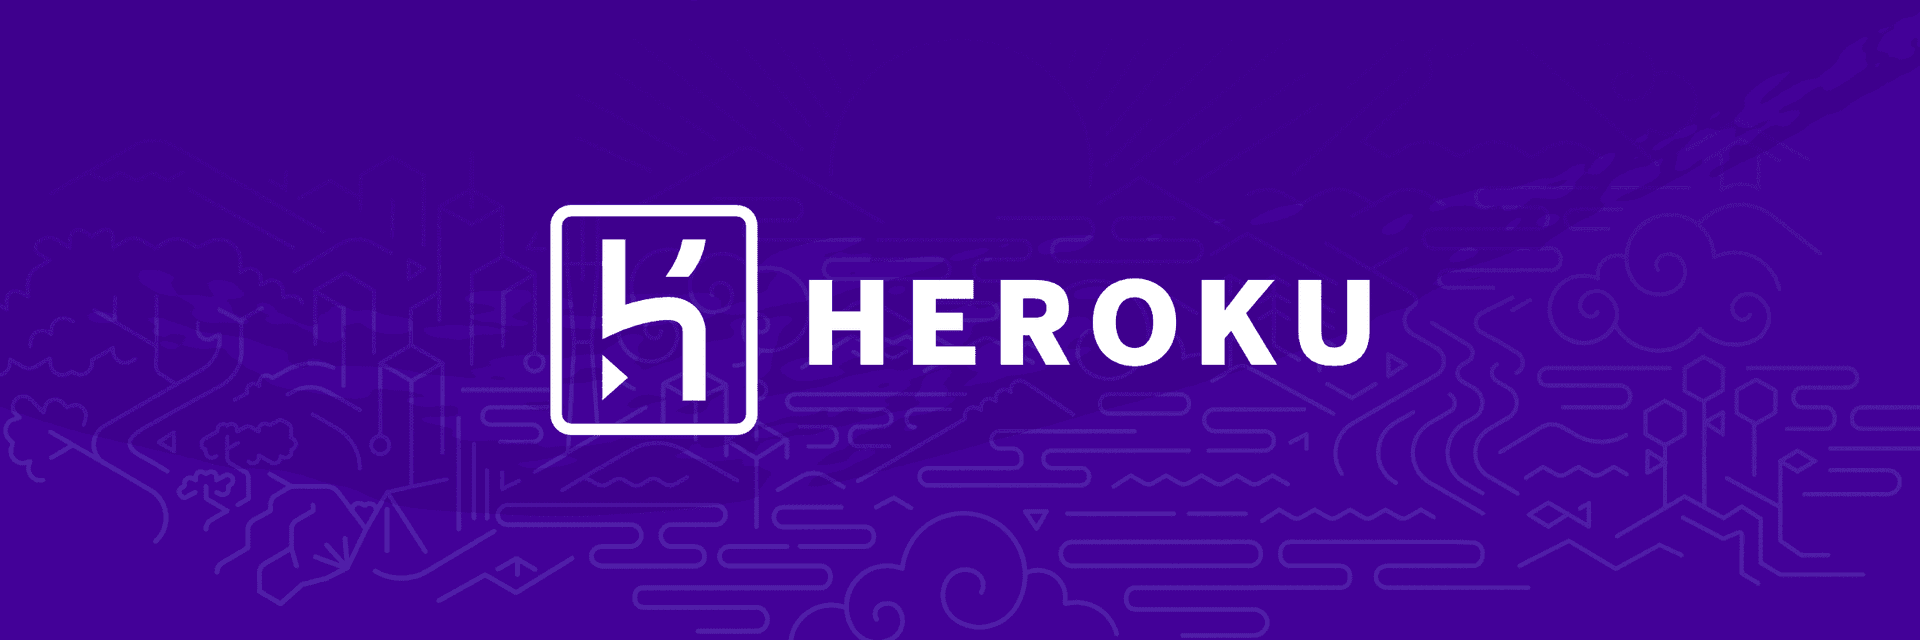 How to set up Continuous Delivery to Heroku